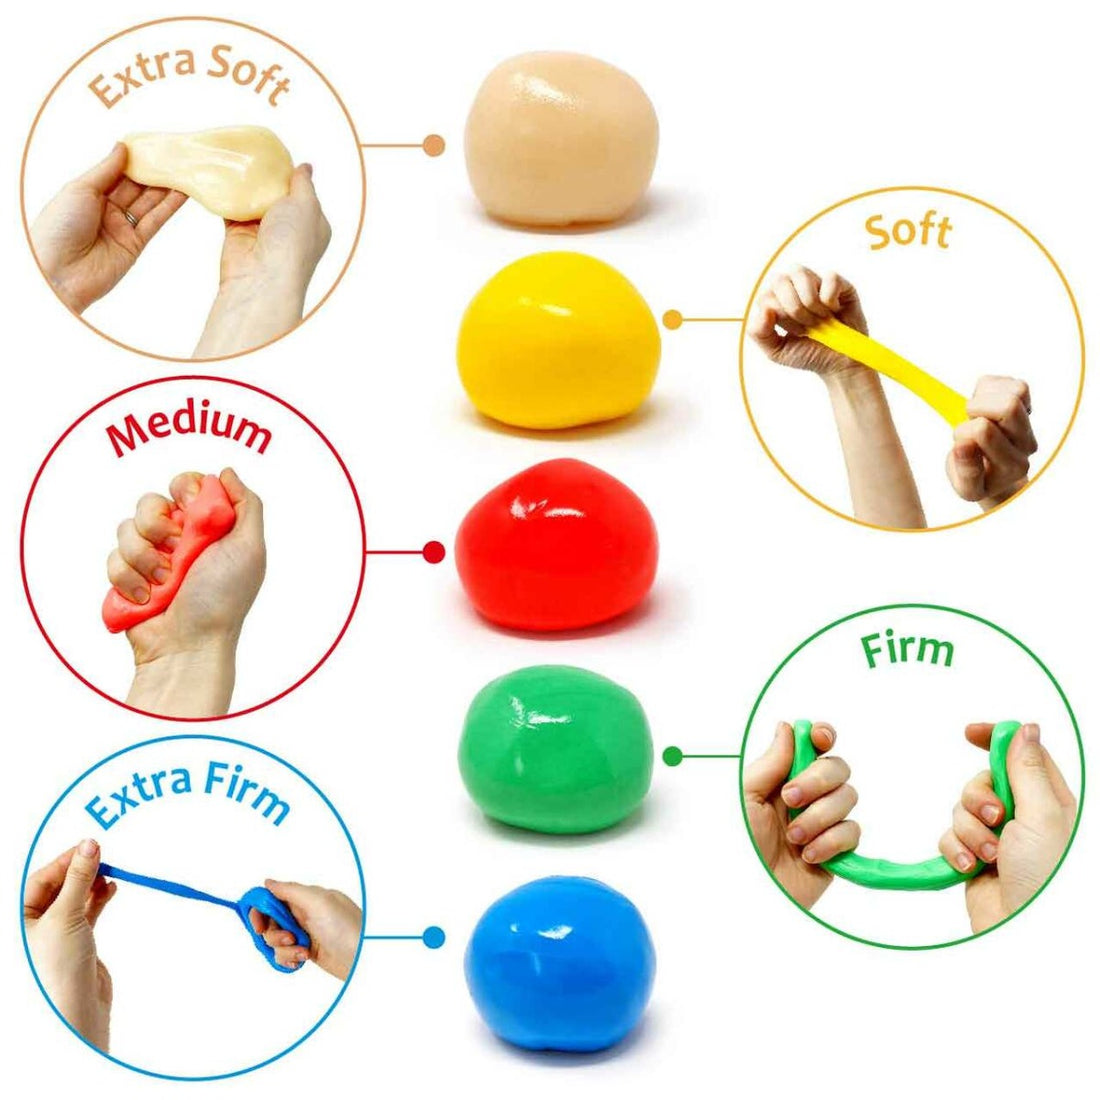 Use of Therapy Putty in Occupational Therapy?